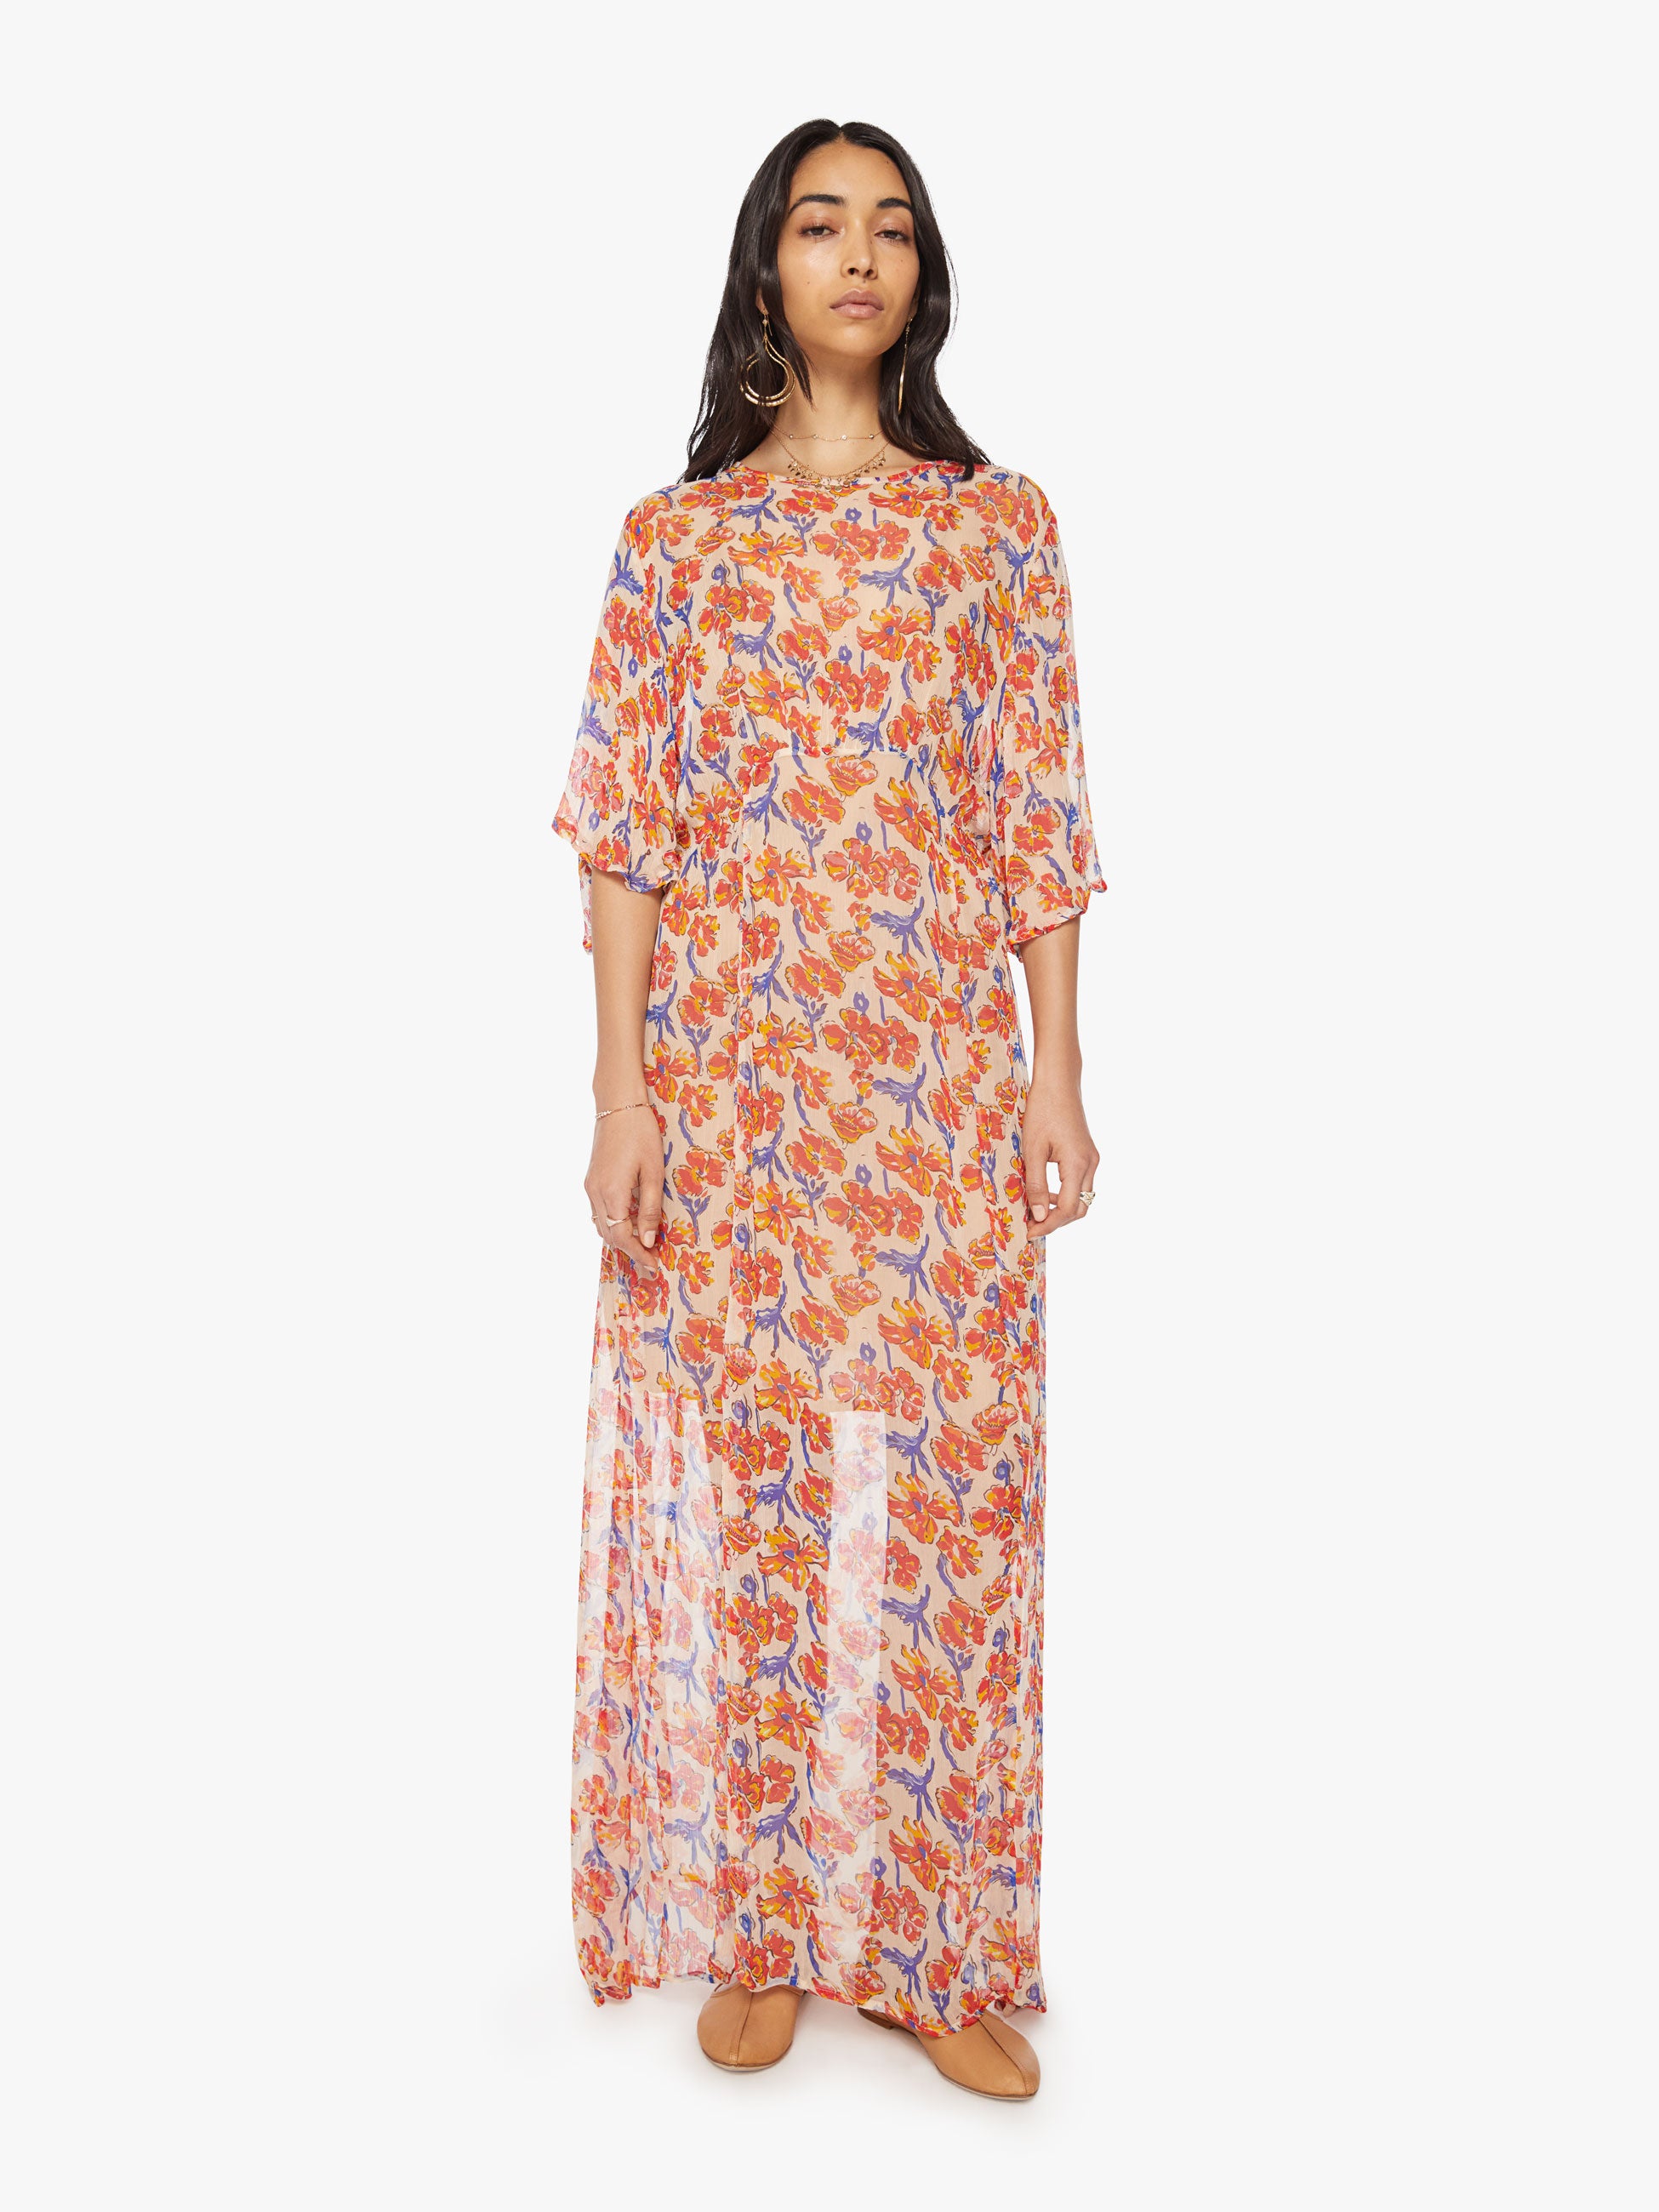 Natalie Martin Lily Dress - Water Color Clementine | MOTHER DENIM